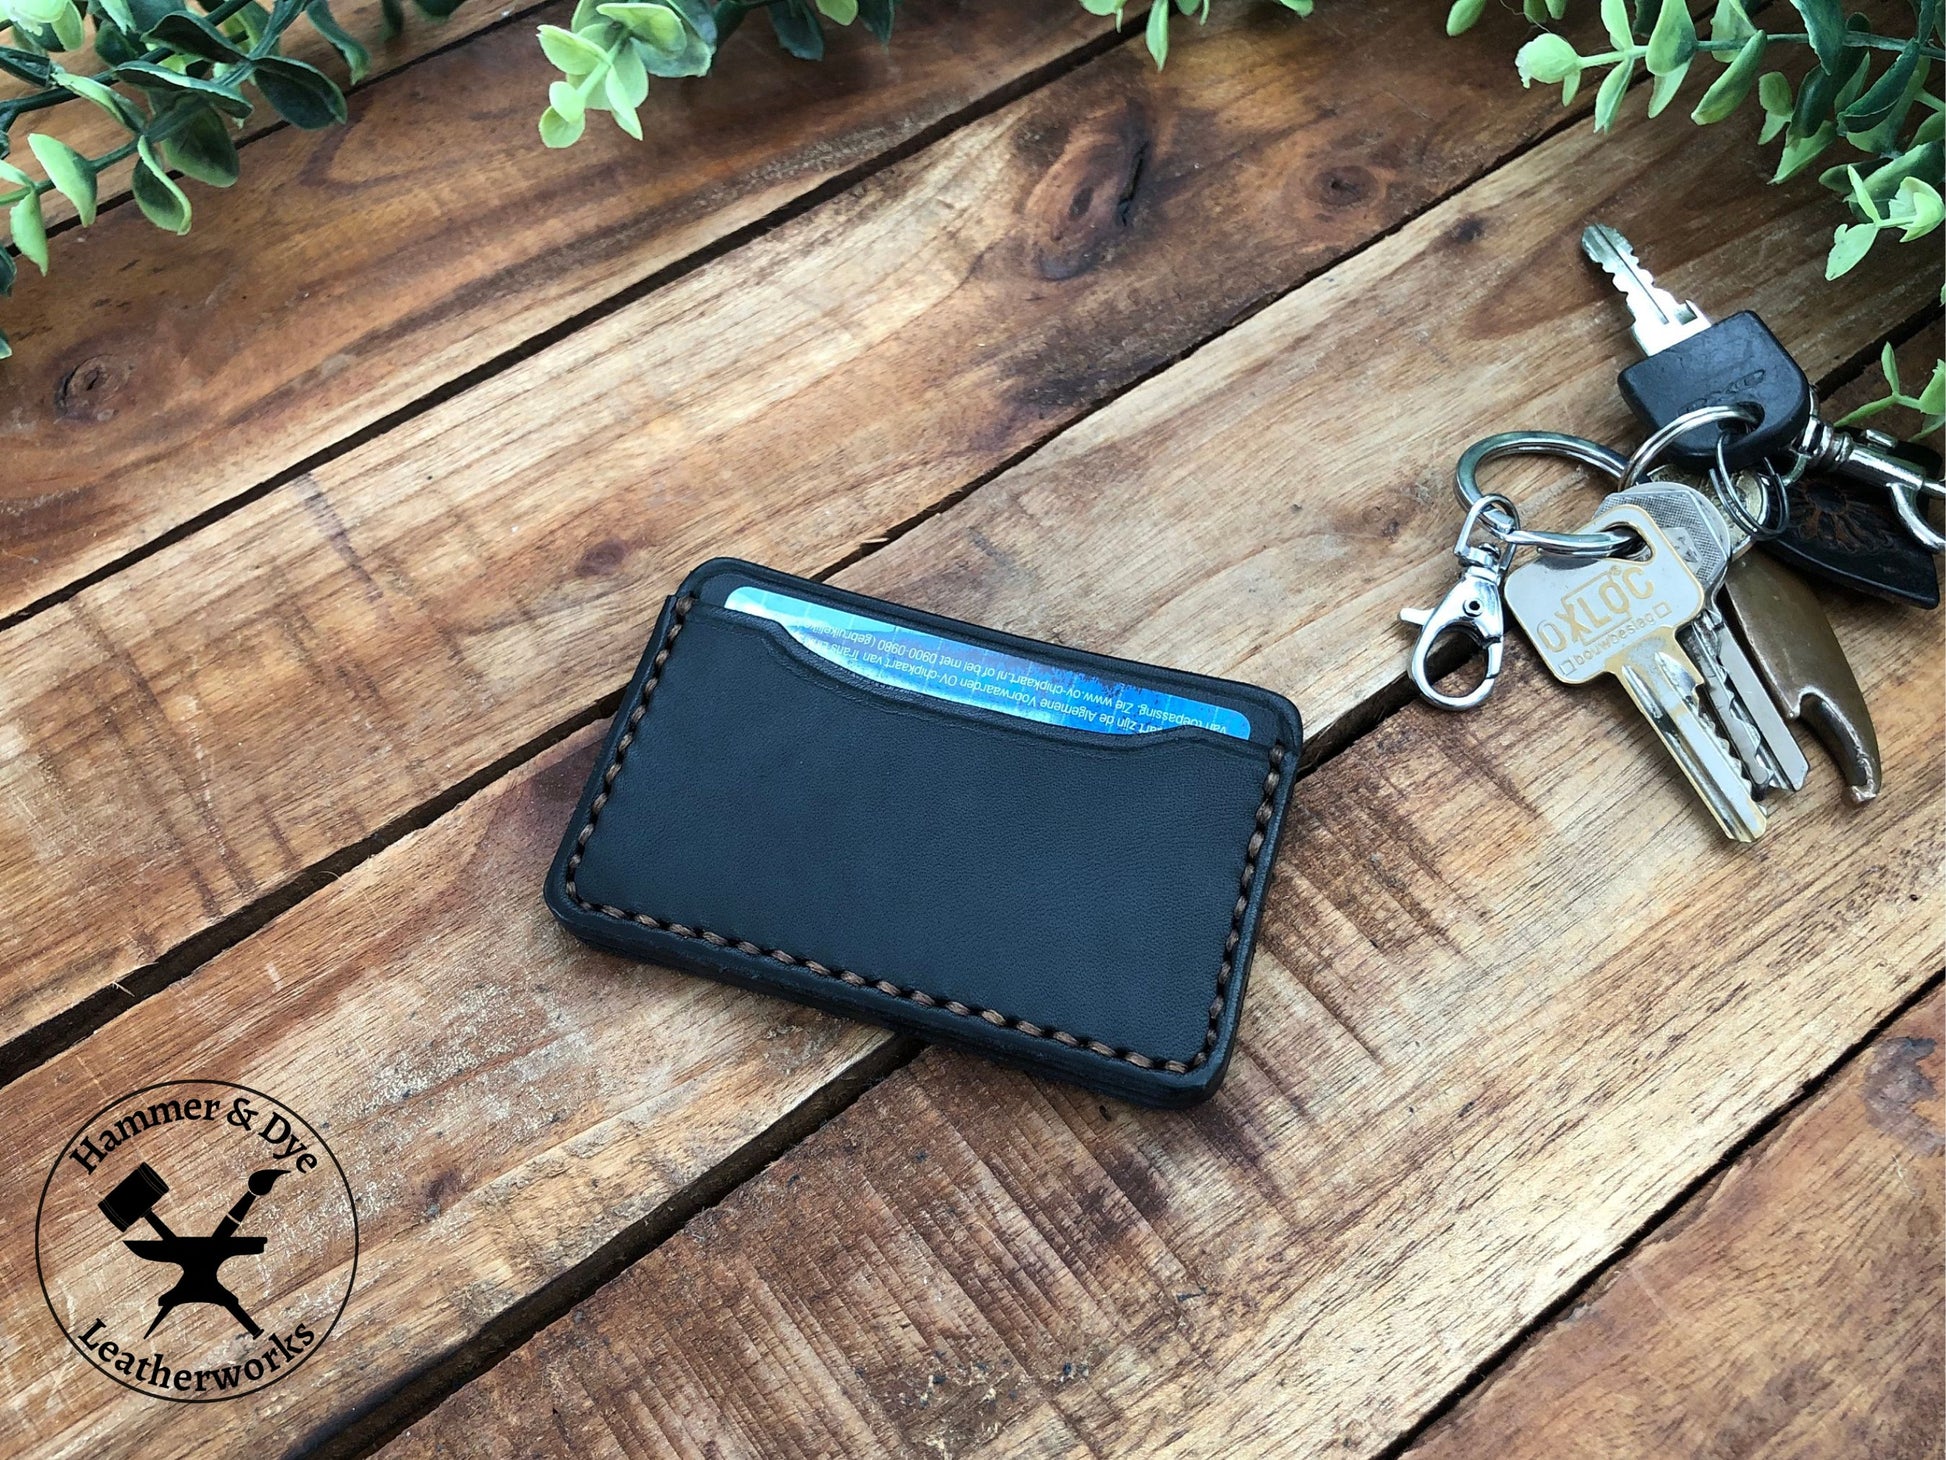 Leather Key Wallet Keychain Purse Leather Card Wallet Card 